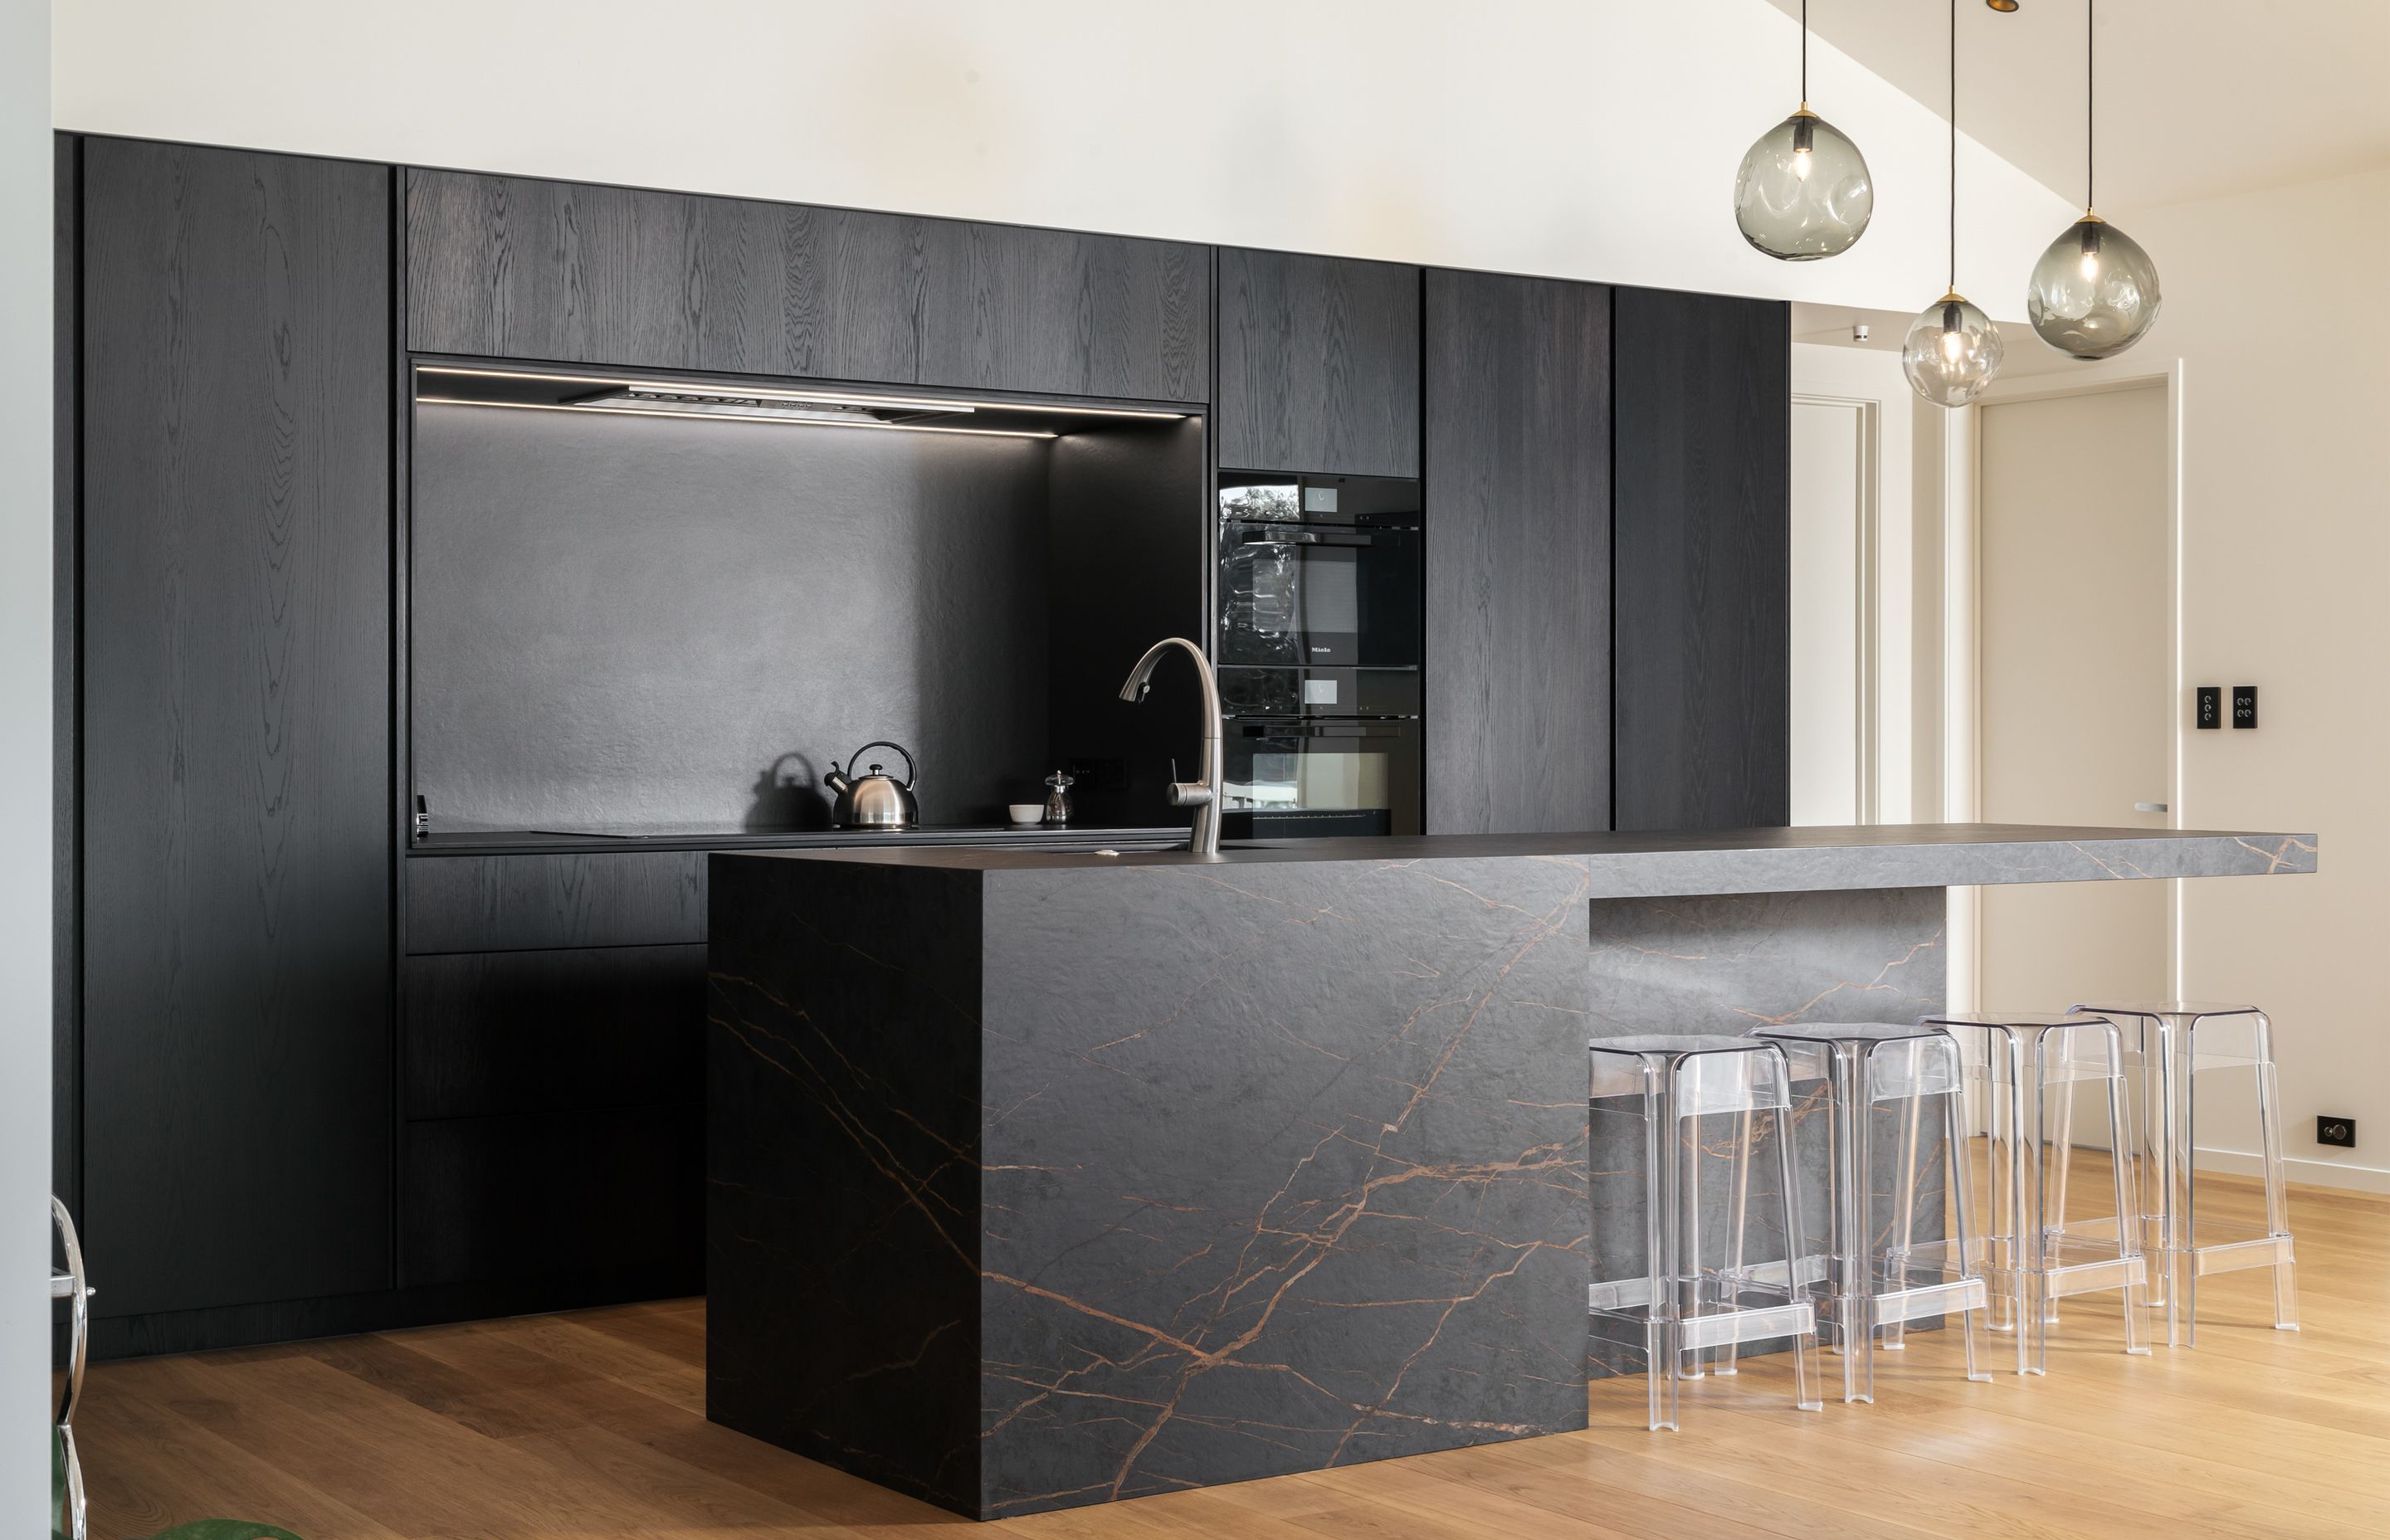 The kitchen features dark stone and black cabinetry – a contrast to the rest of the space.